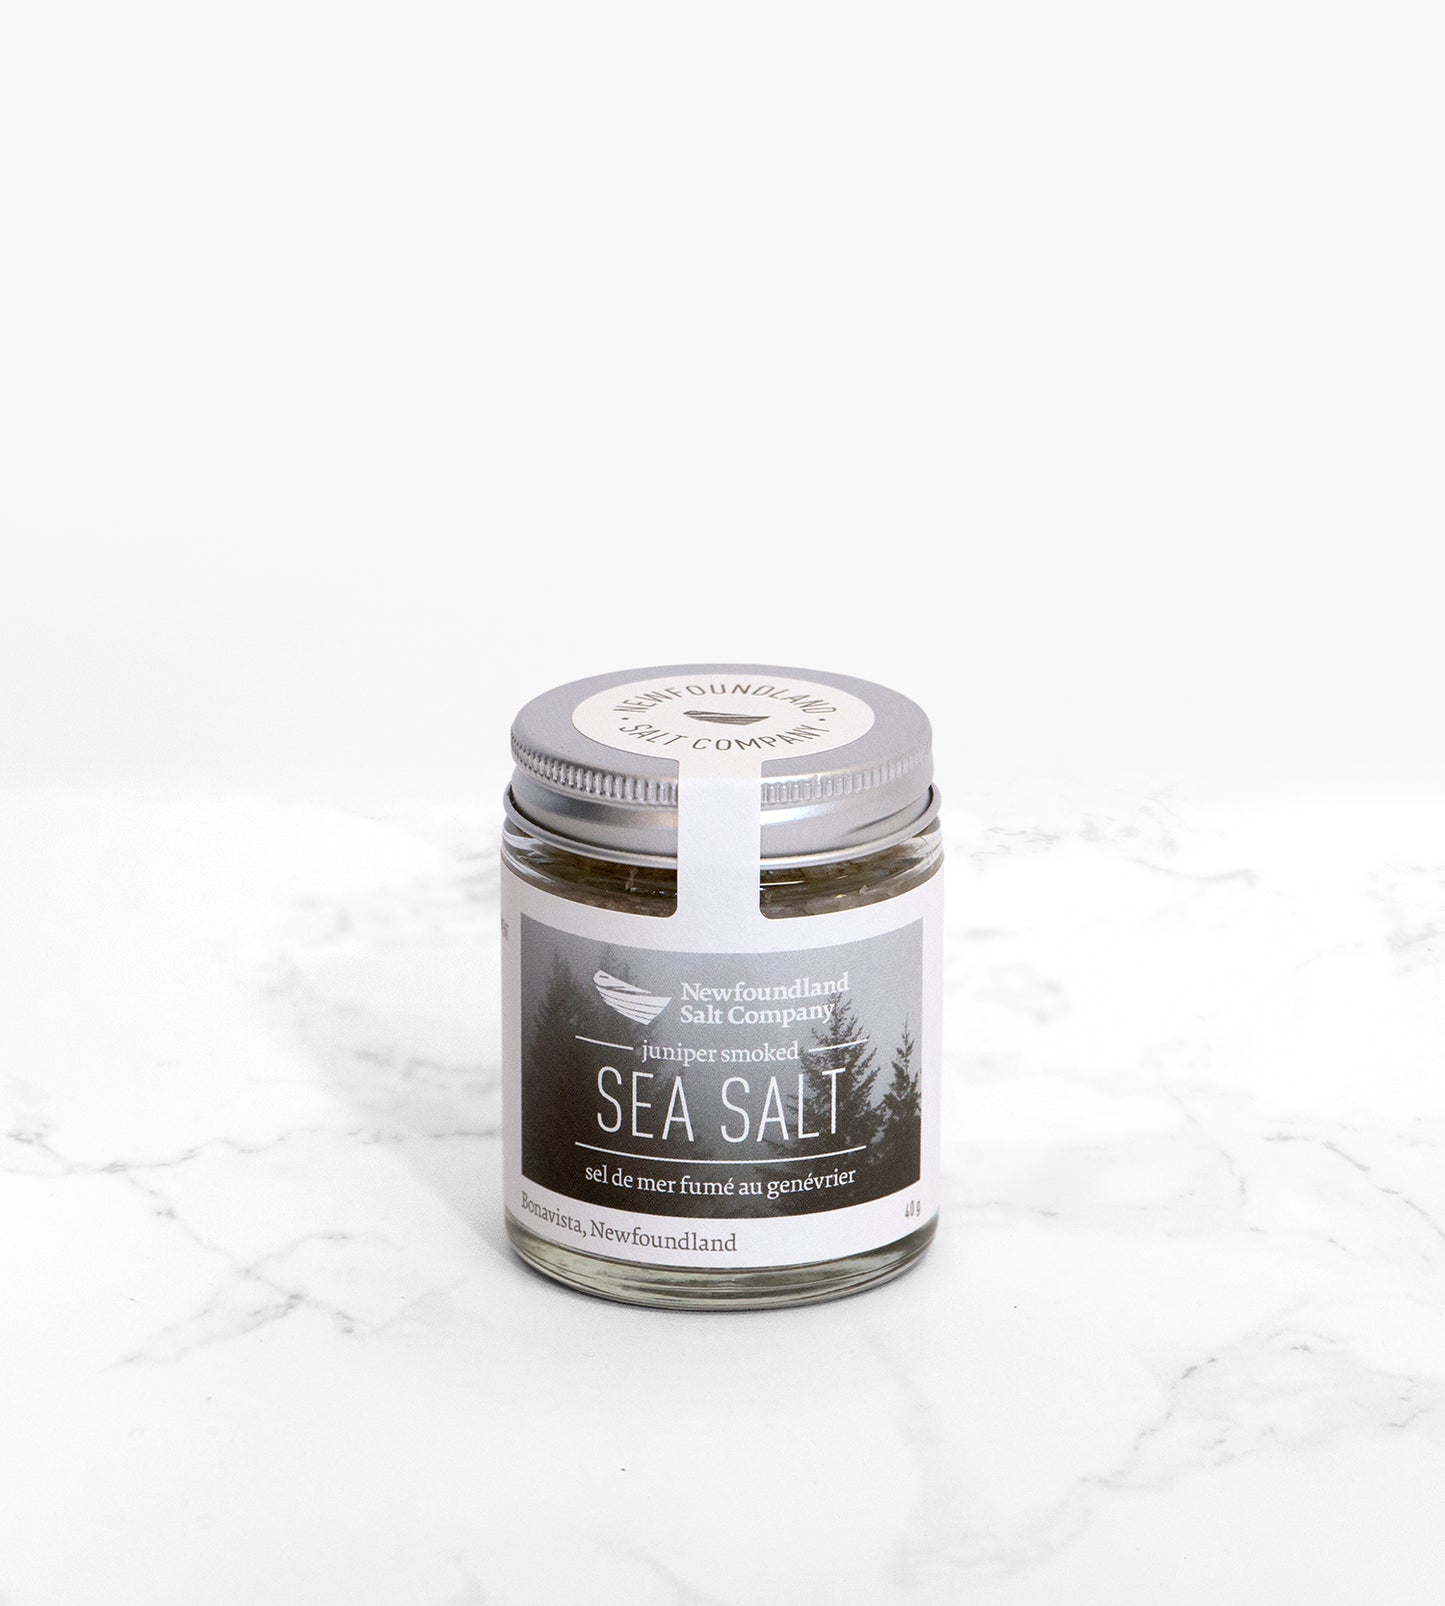 A glass jar of juniper-smoked sea salt on a white marble surface. The label on the jar depicts a foggy conifer forest.